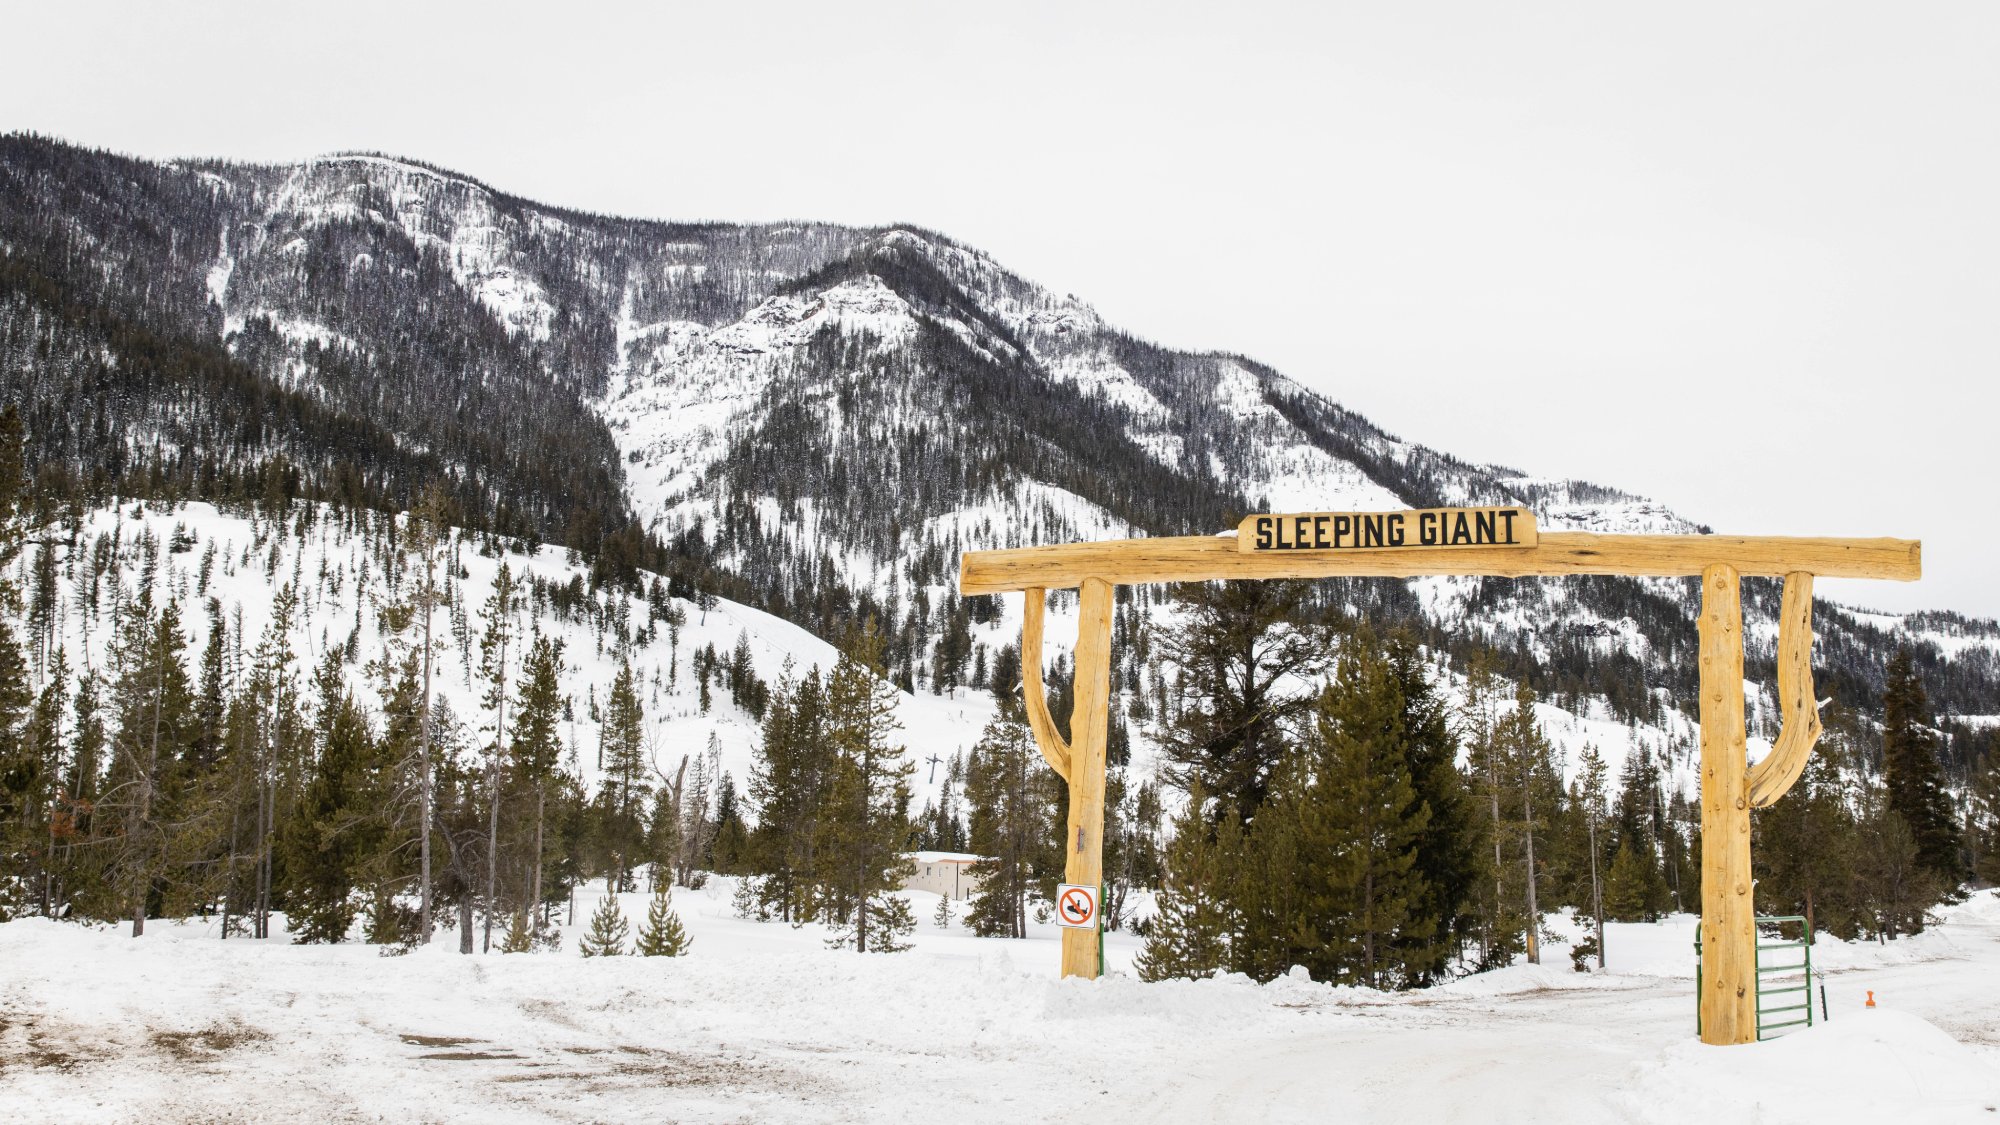 The Sleeping Giant sign in Cody Yellowstone